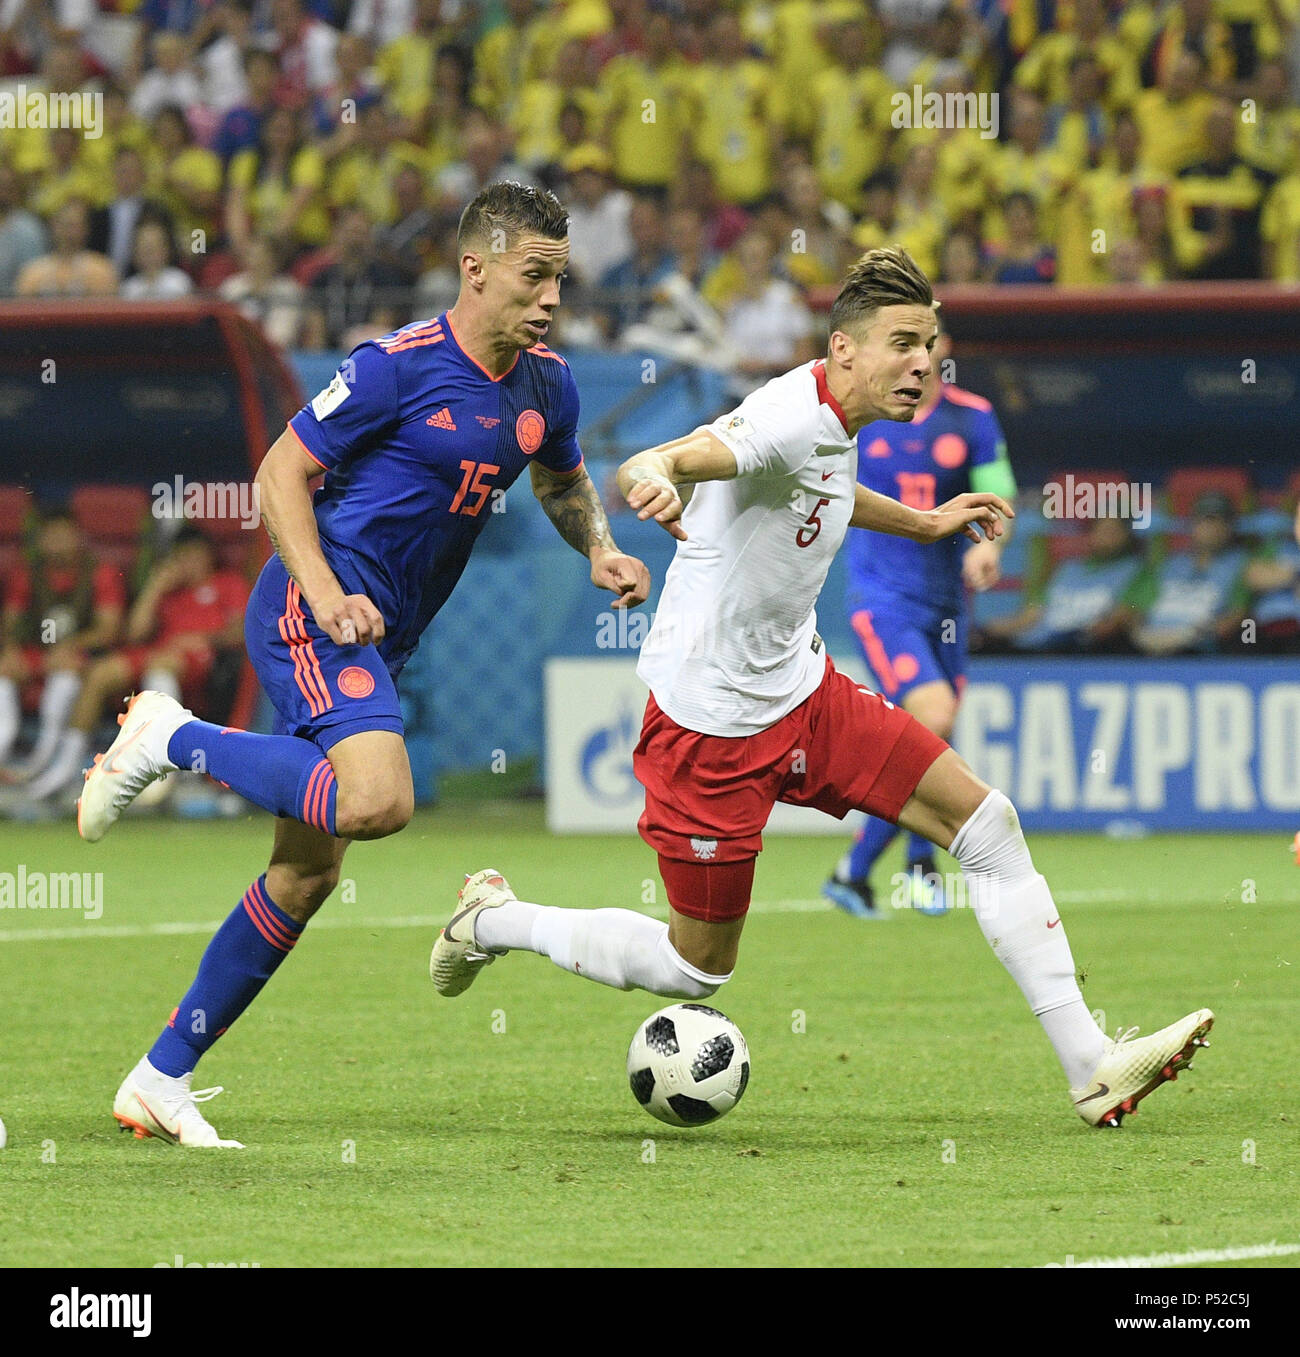 Kazan, Russia. 24th June, 2018. Mateus Uribe (L) of Colombia competes during the 2018 FIFA World Cup Group H match between Poland and Colombia in Kazan, Russia, June 24, 2018. Colombia won 3-0. Credit: Lui Siu Wai/Xinhua/Alamy Live News Stock Photo